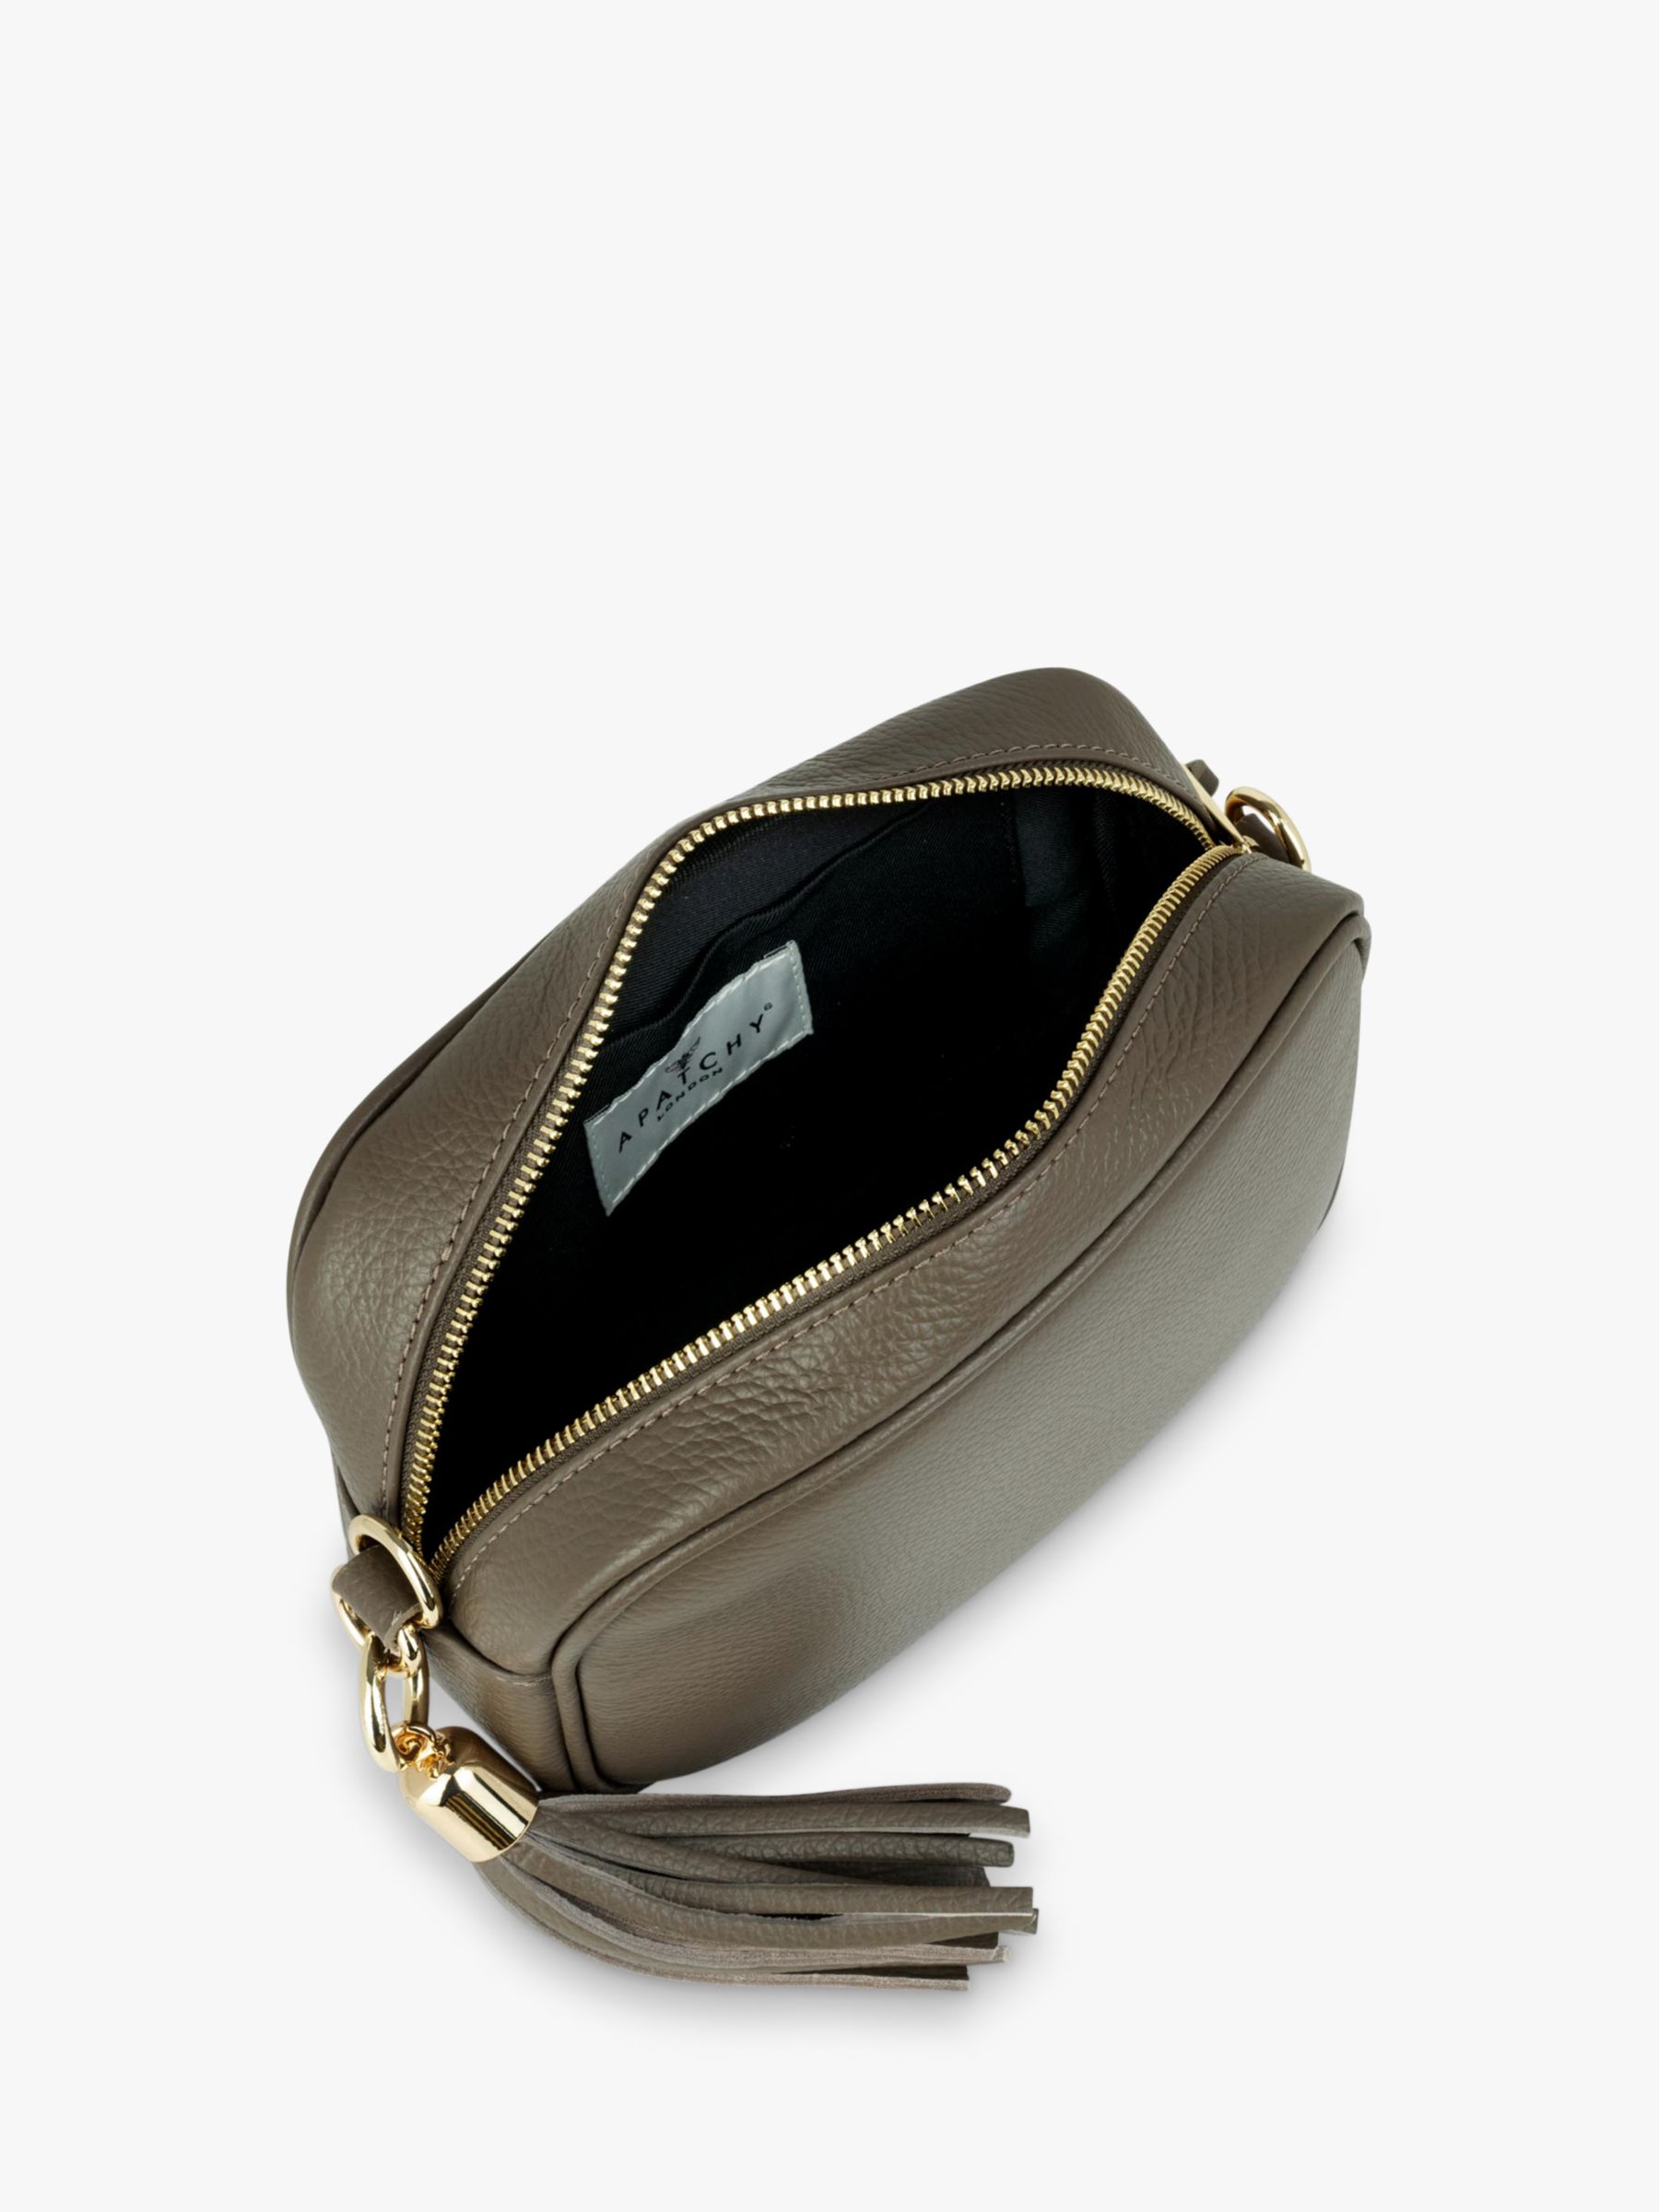 Buy Apatchy Stripe Strap Leather Crossbody Bag Online at johnlewis.com